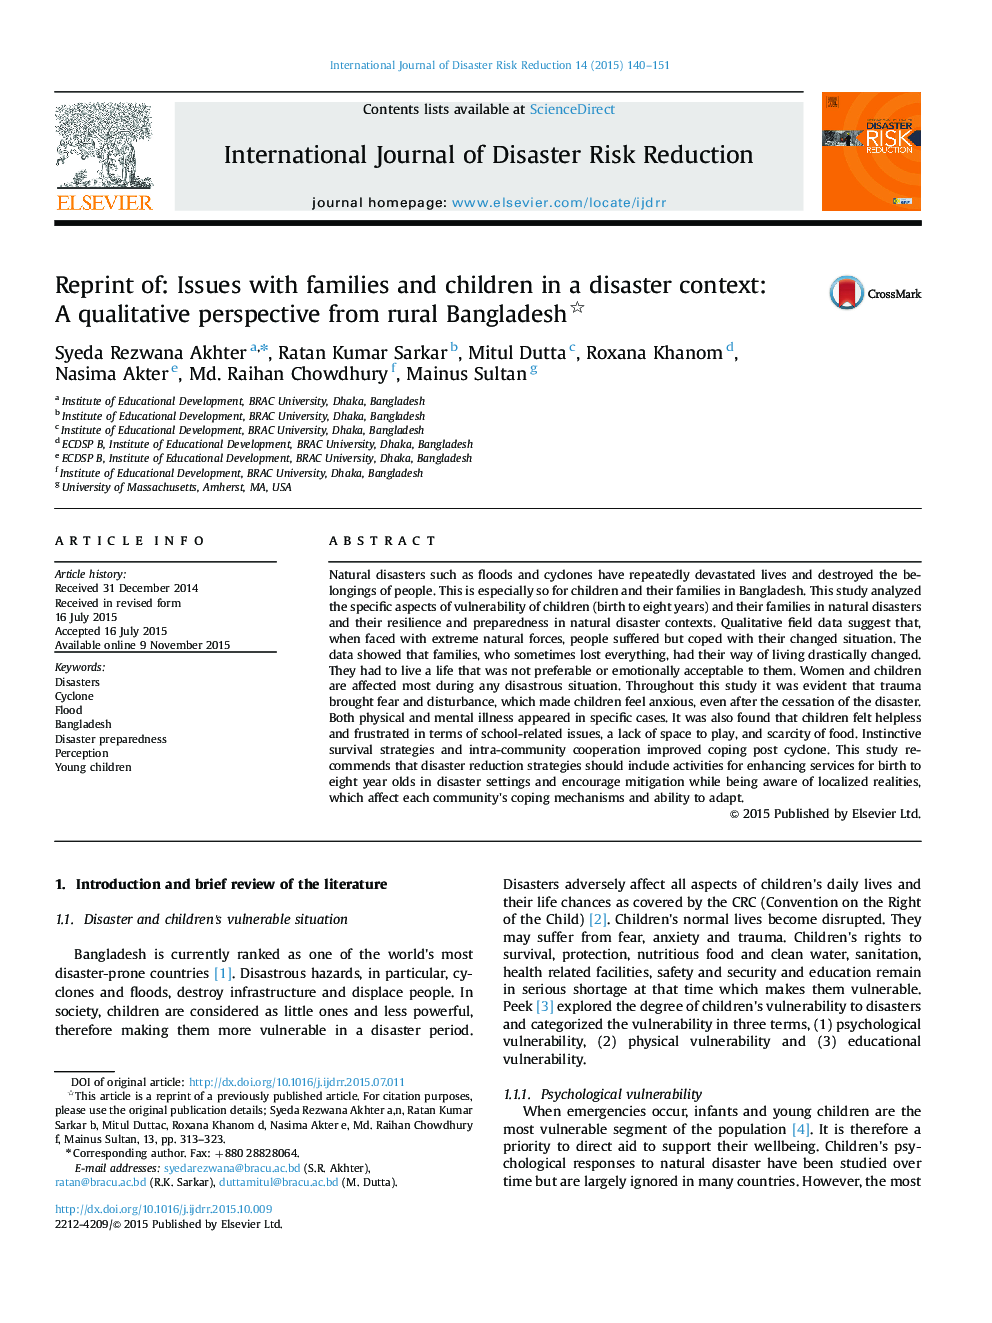 Reprint of: Issues with families and children in a disaster context: A qualitative perspective from rural Bangladesh 